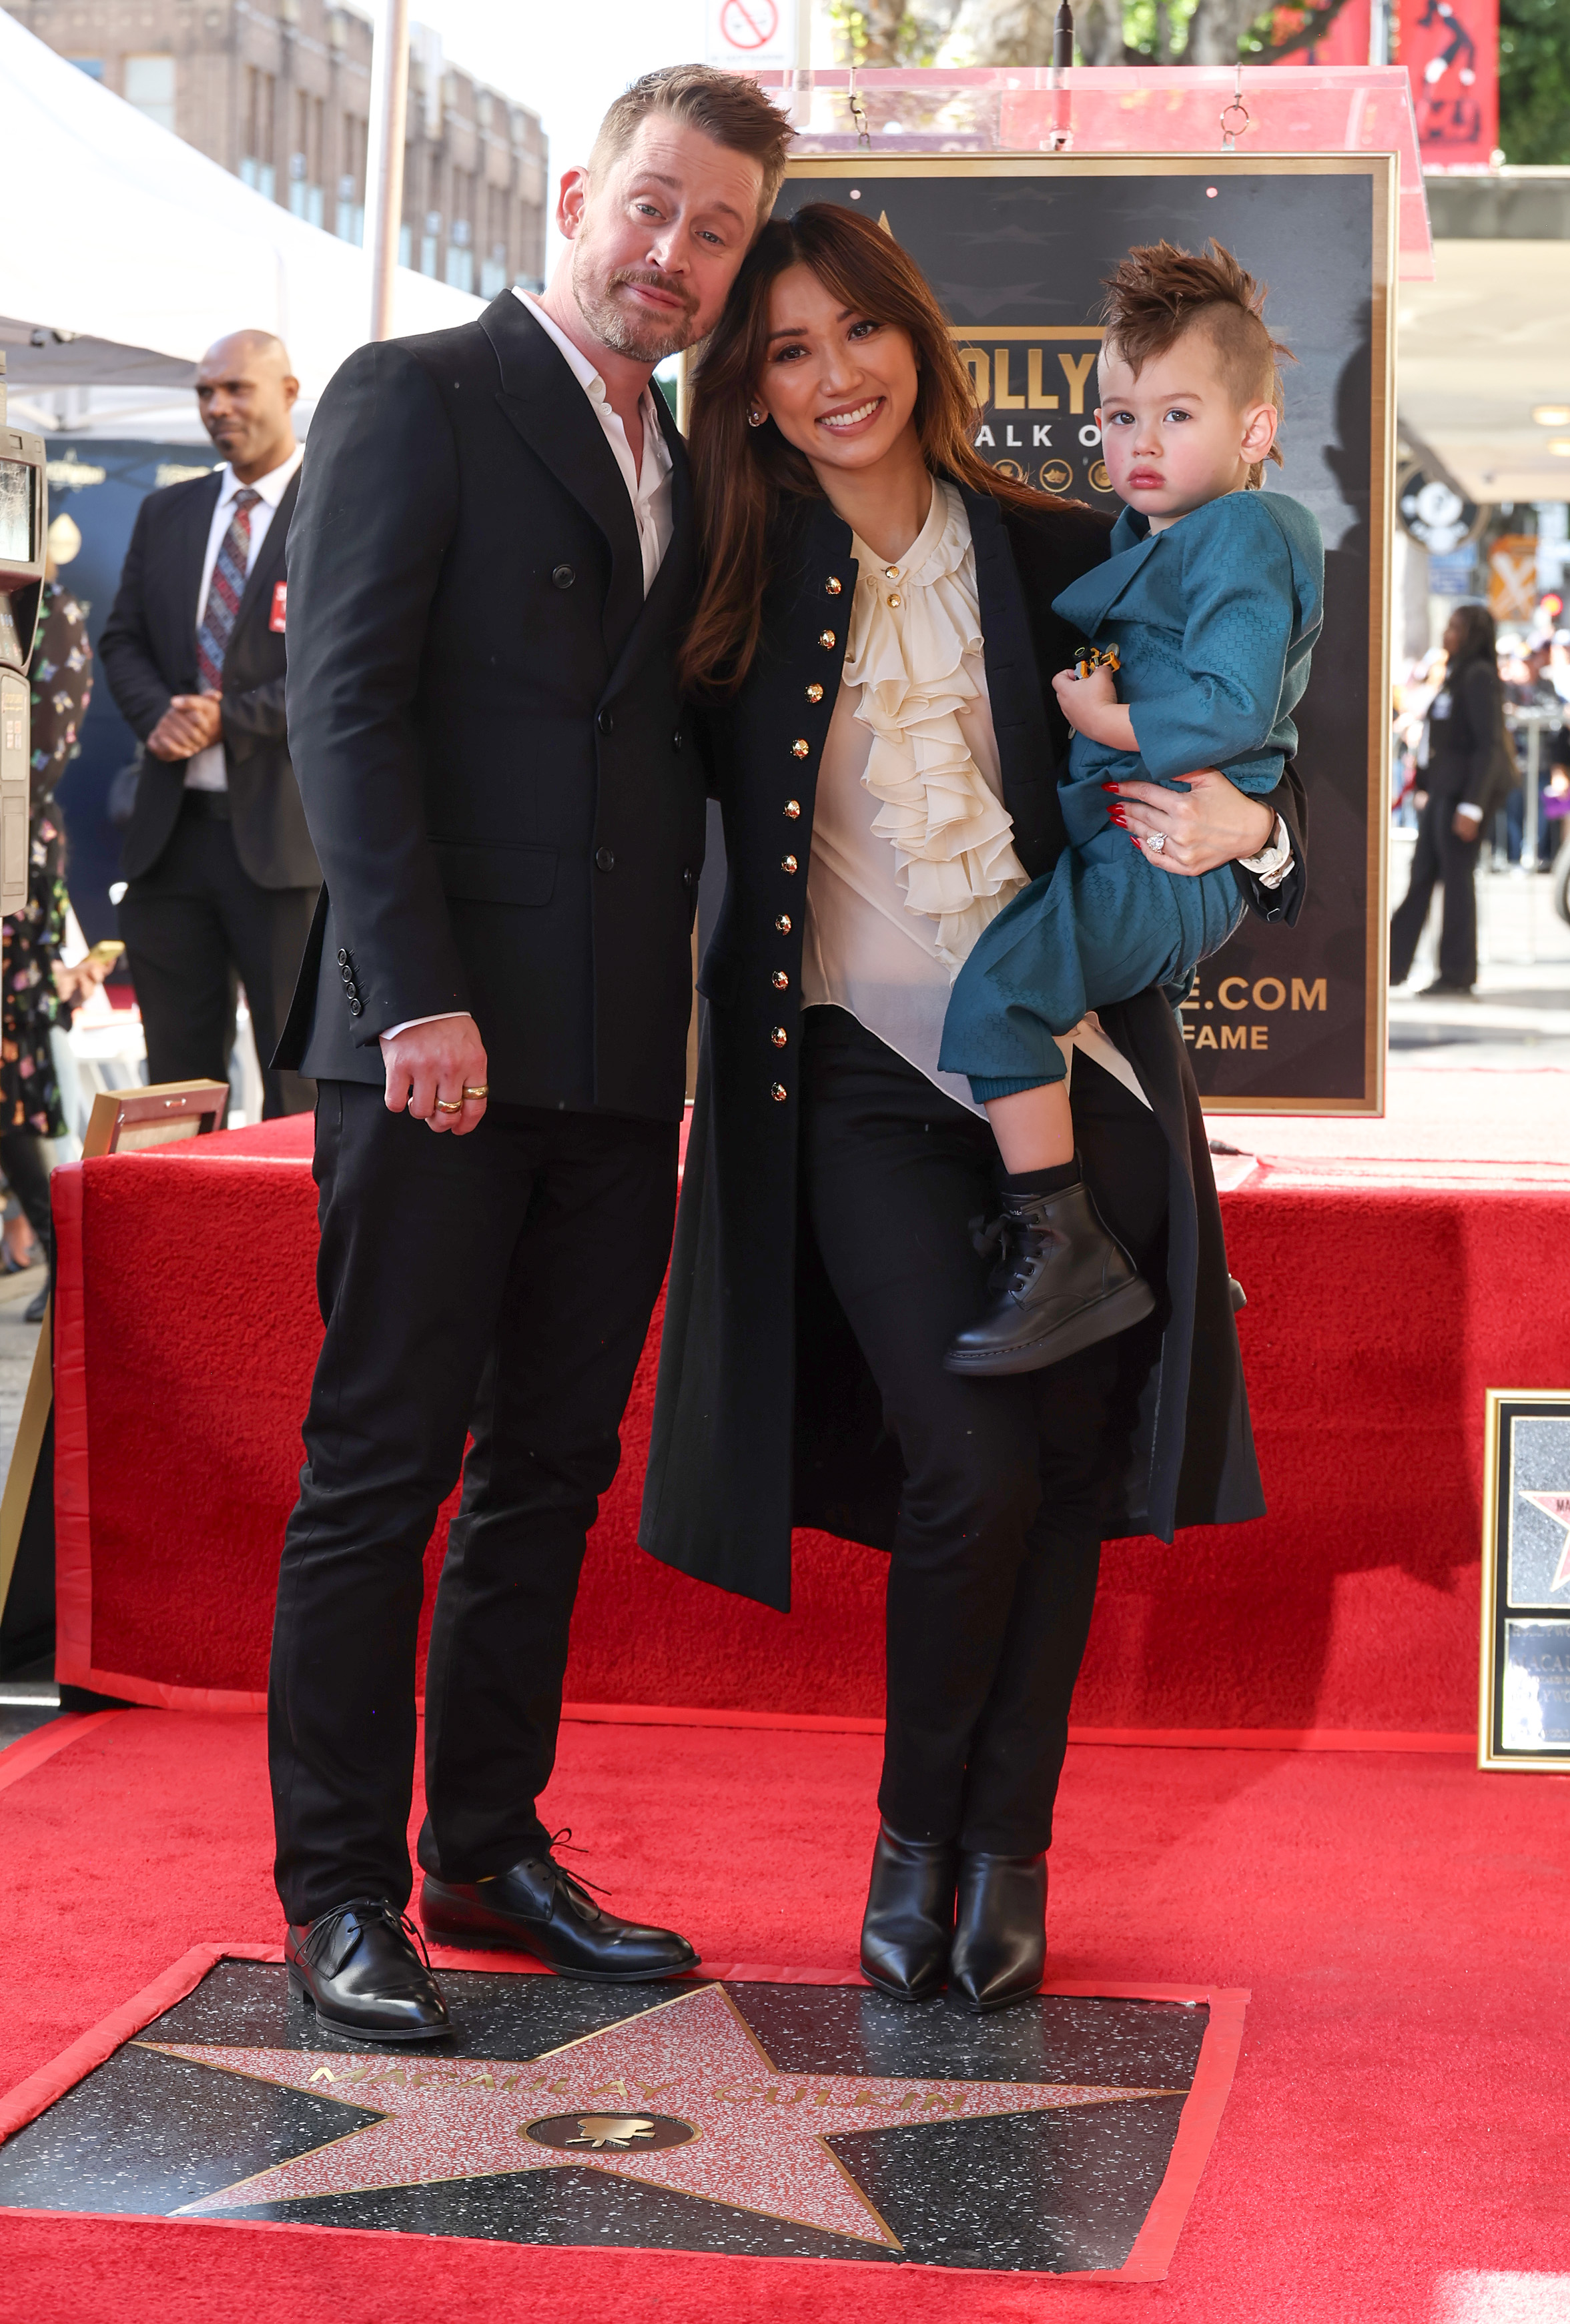 Macaulay Culkin, Brenda Song, and their son Dakota at Macaulay Culkin's Hollywood Walk of Fame star ceremony in Hollywood, California on December 1, 2023 | Source: Getty Images